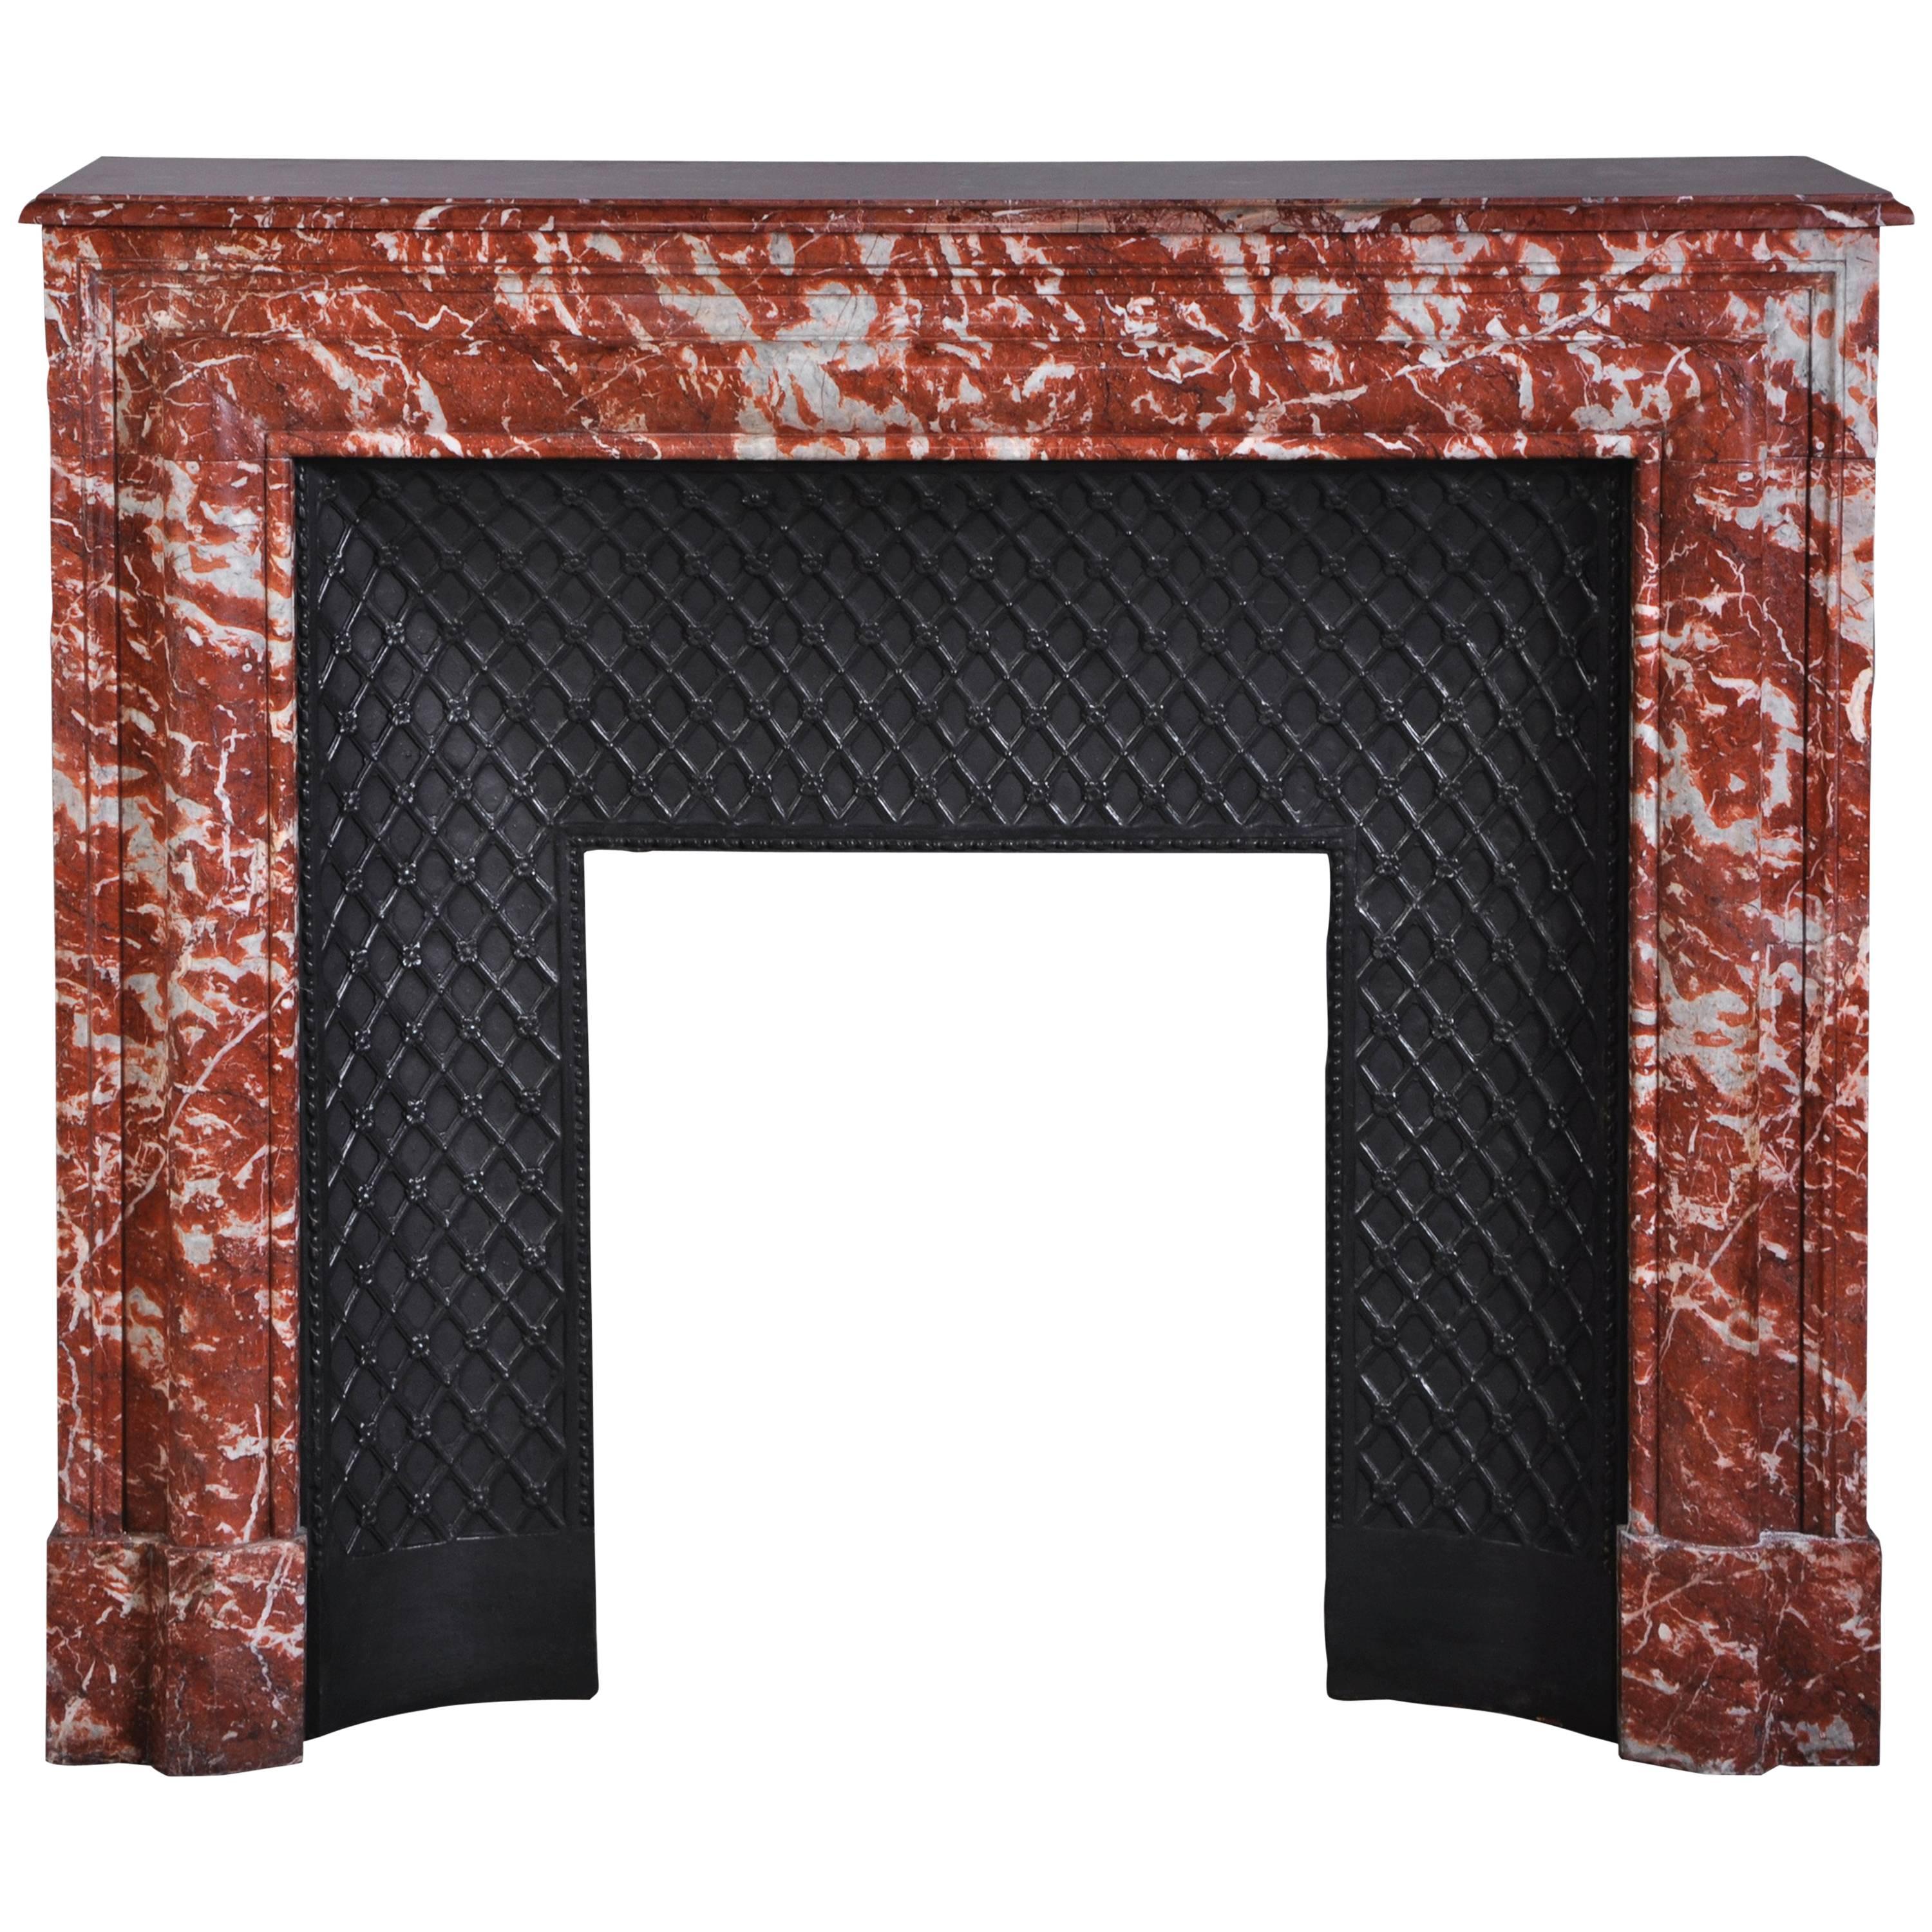 Antique Louis XIV Style Fireplace in Red from Languedoc Marble, 19th Century For Sale